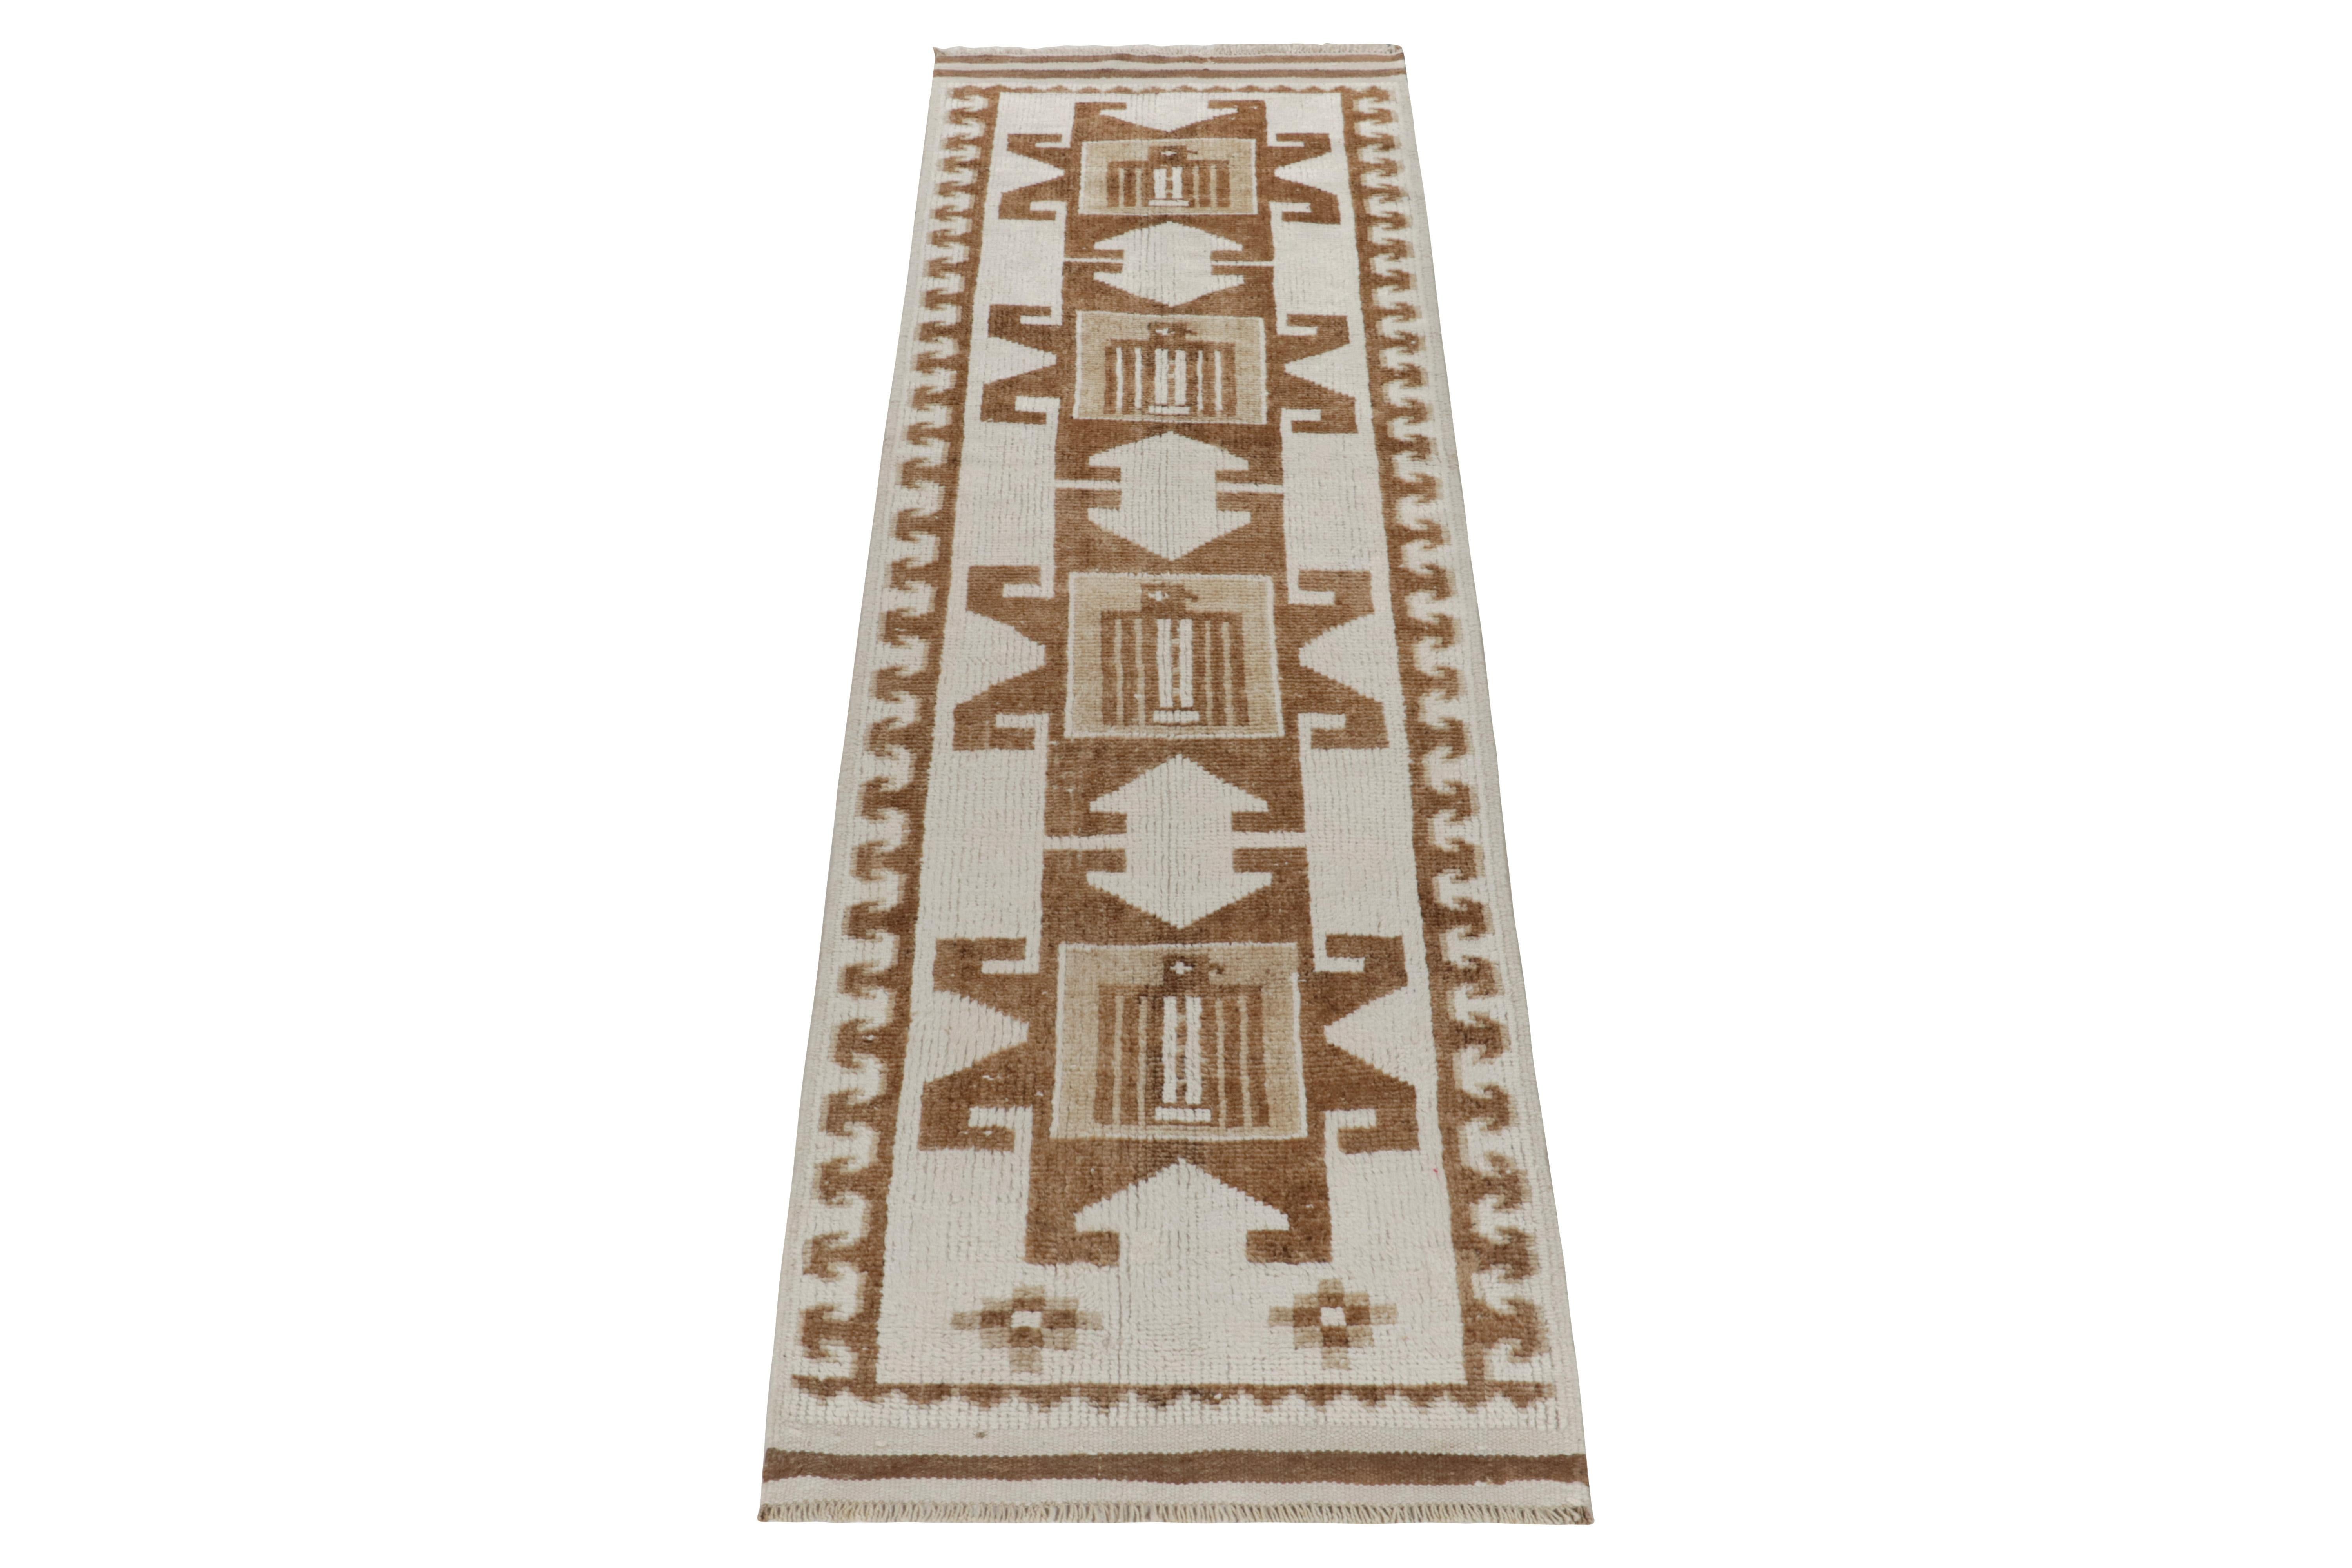 From Rug & Kilim’s vintage selections, a 3x10 hand-knotted wool runner from Turkey bearing nomadic design aesthetics. The 1950s creation showcases a union of geometric repetition & tribal sensibilities for a clean look in off-white & tones of